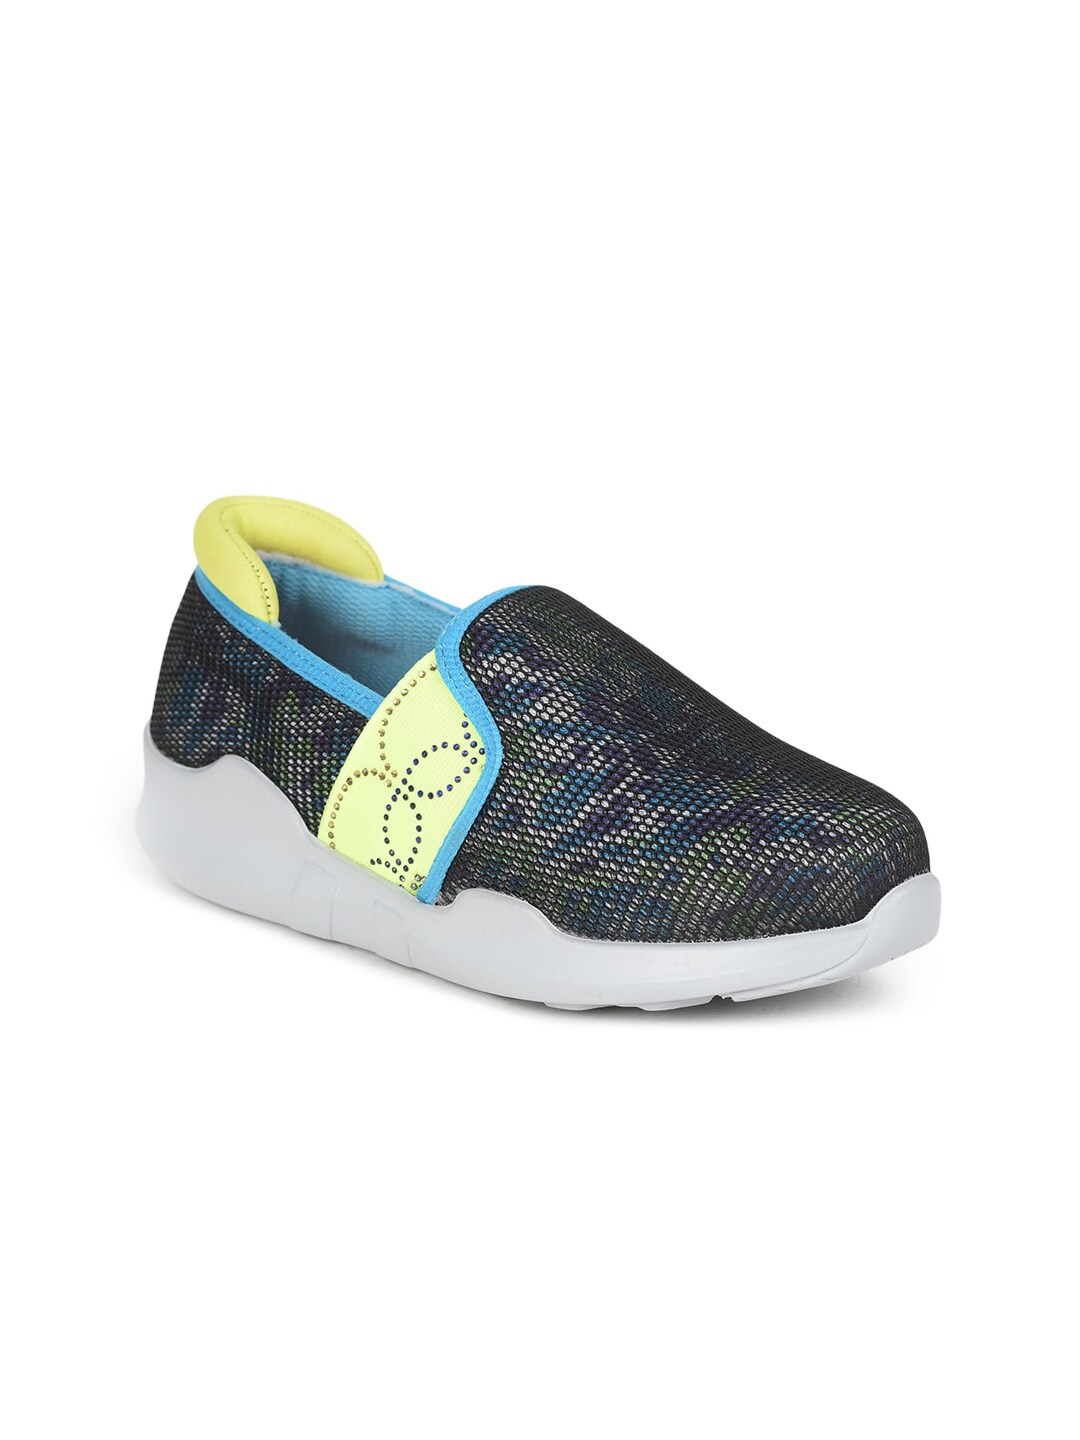 Liberty Women Blue Printed Slip-On Sneakers Price in India